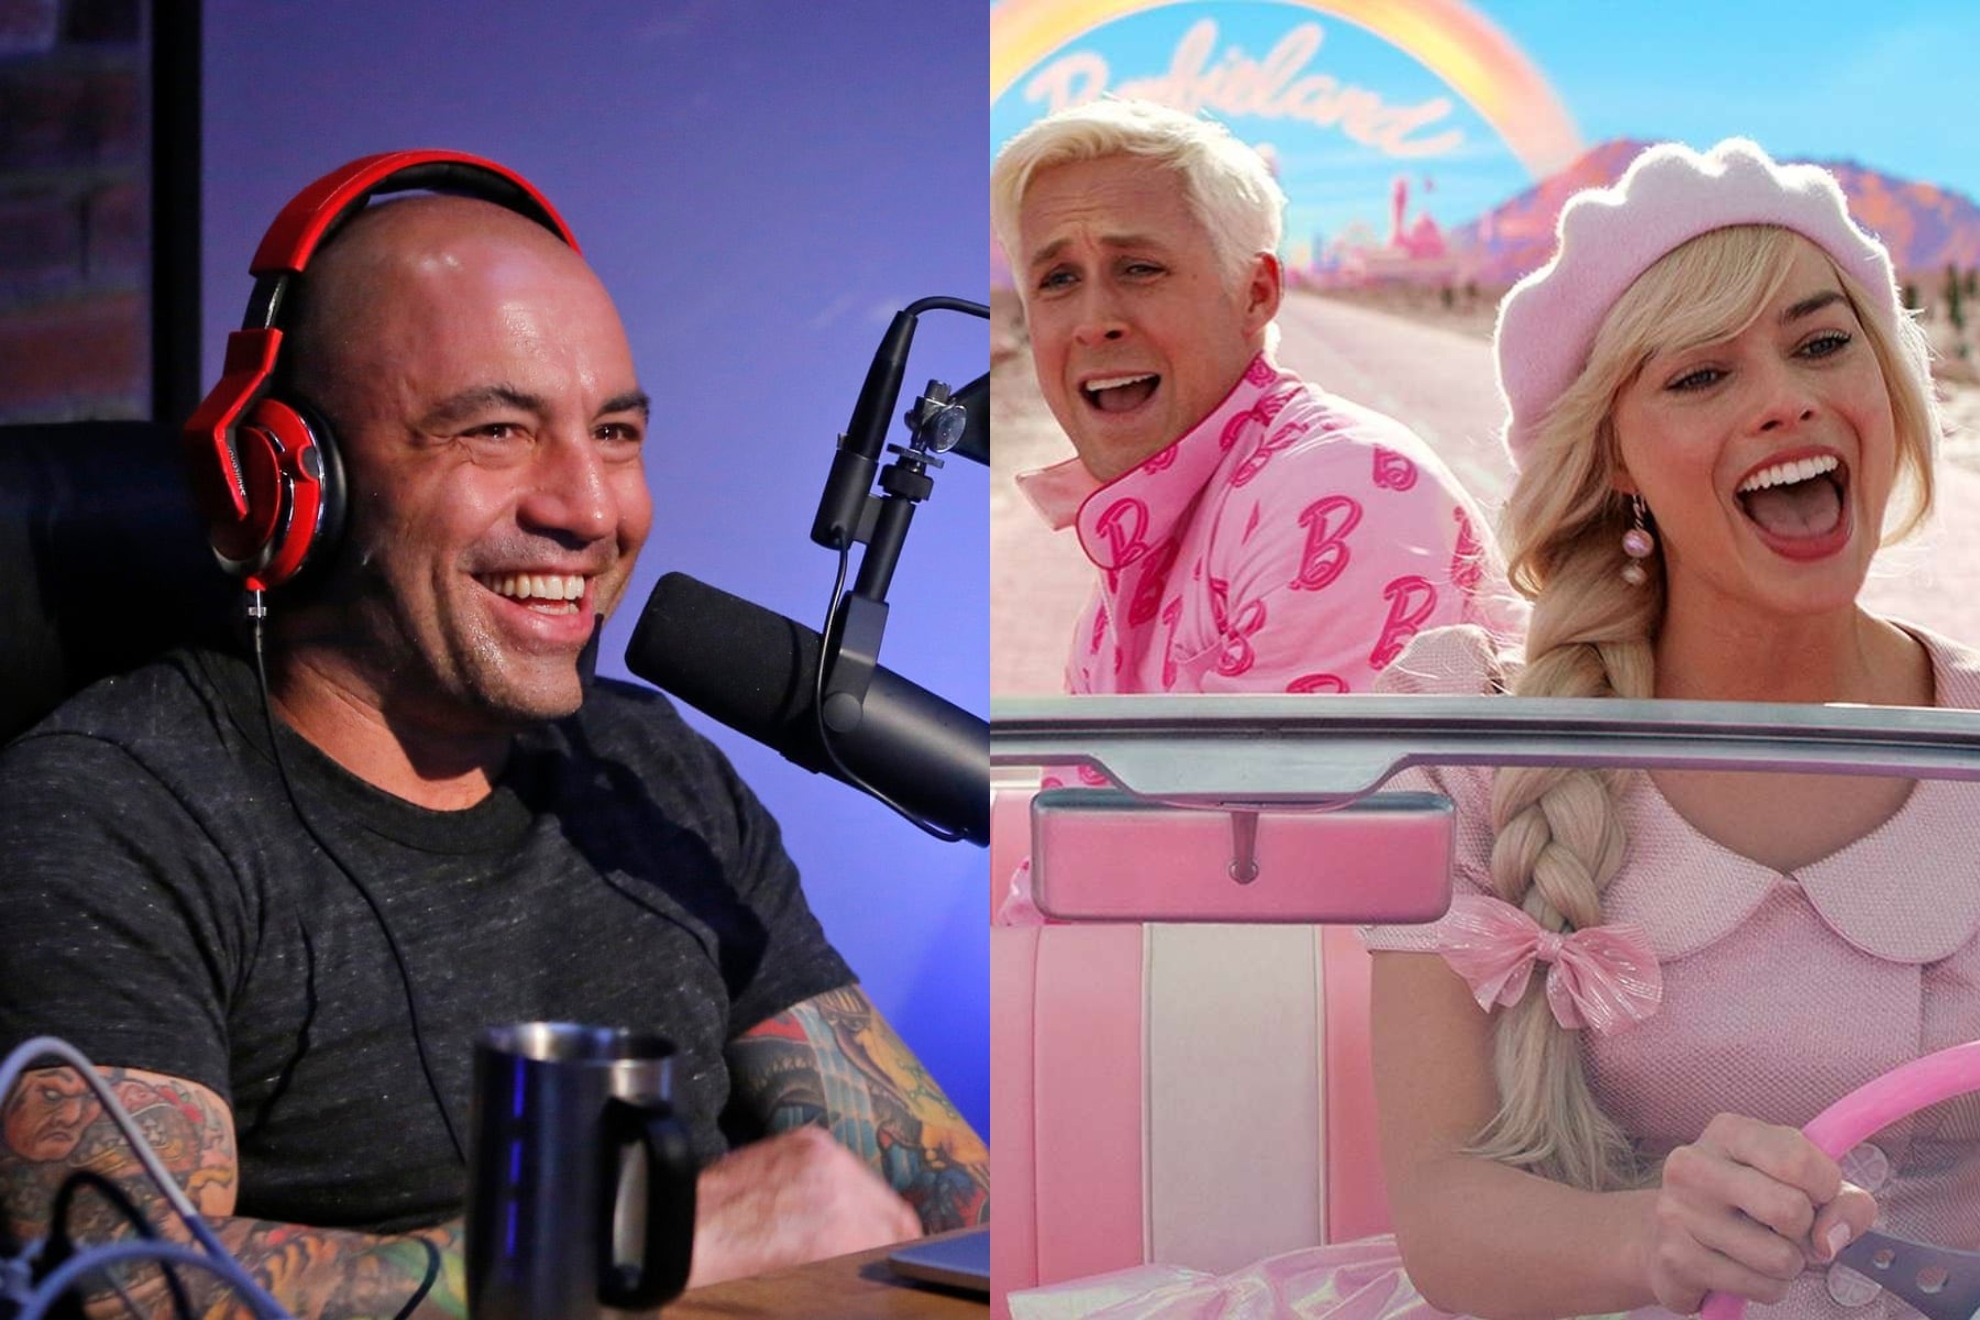 Joe Rogan: Its a fun, silly movie about dolls who come to life